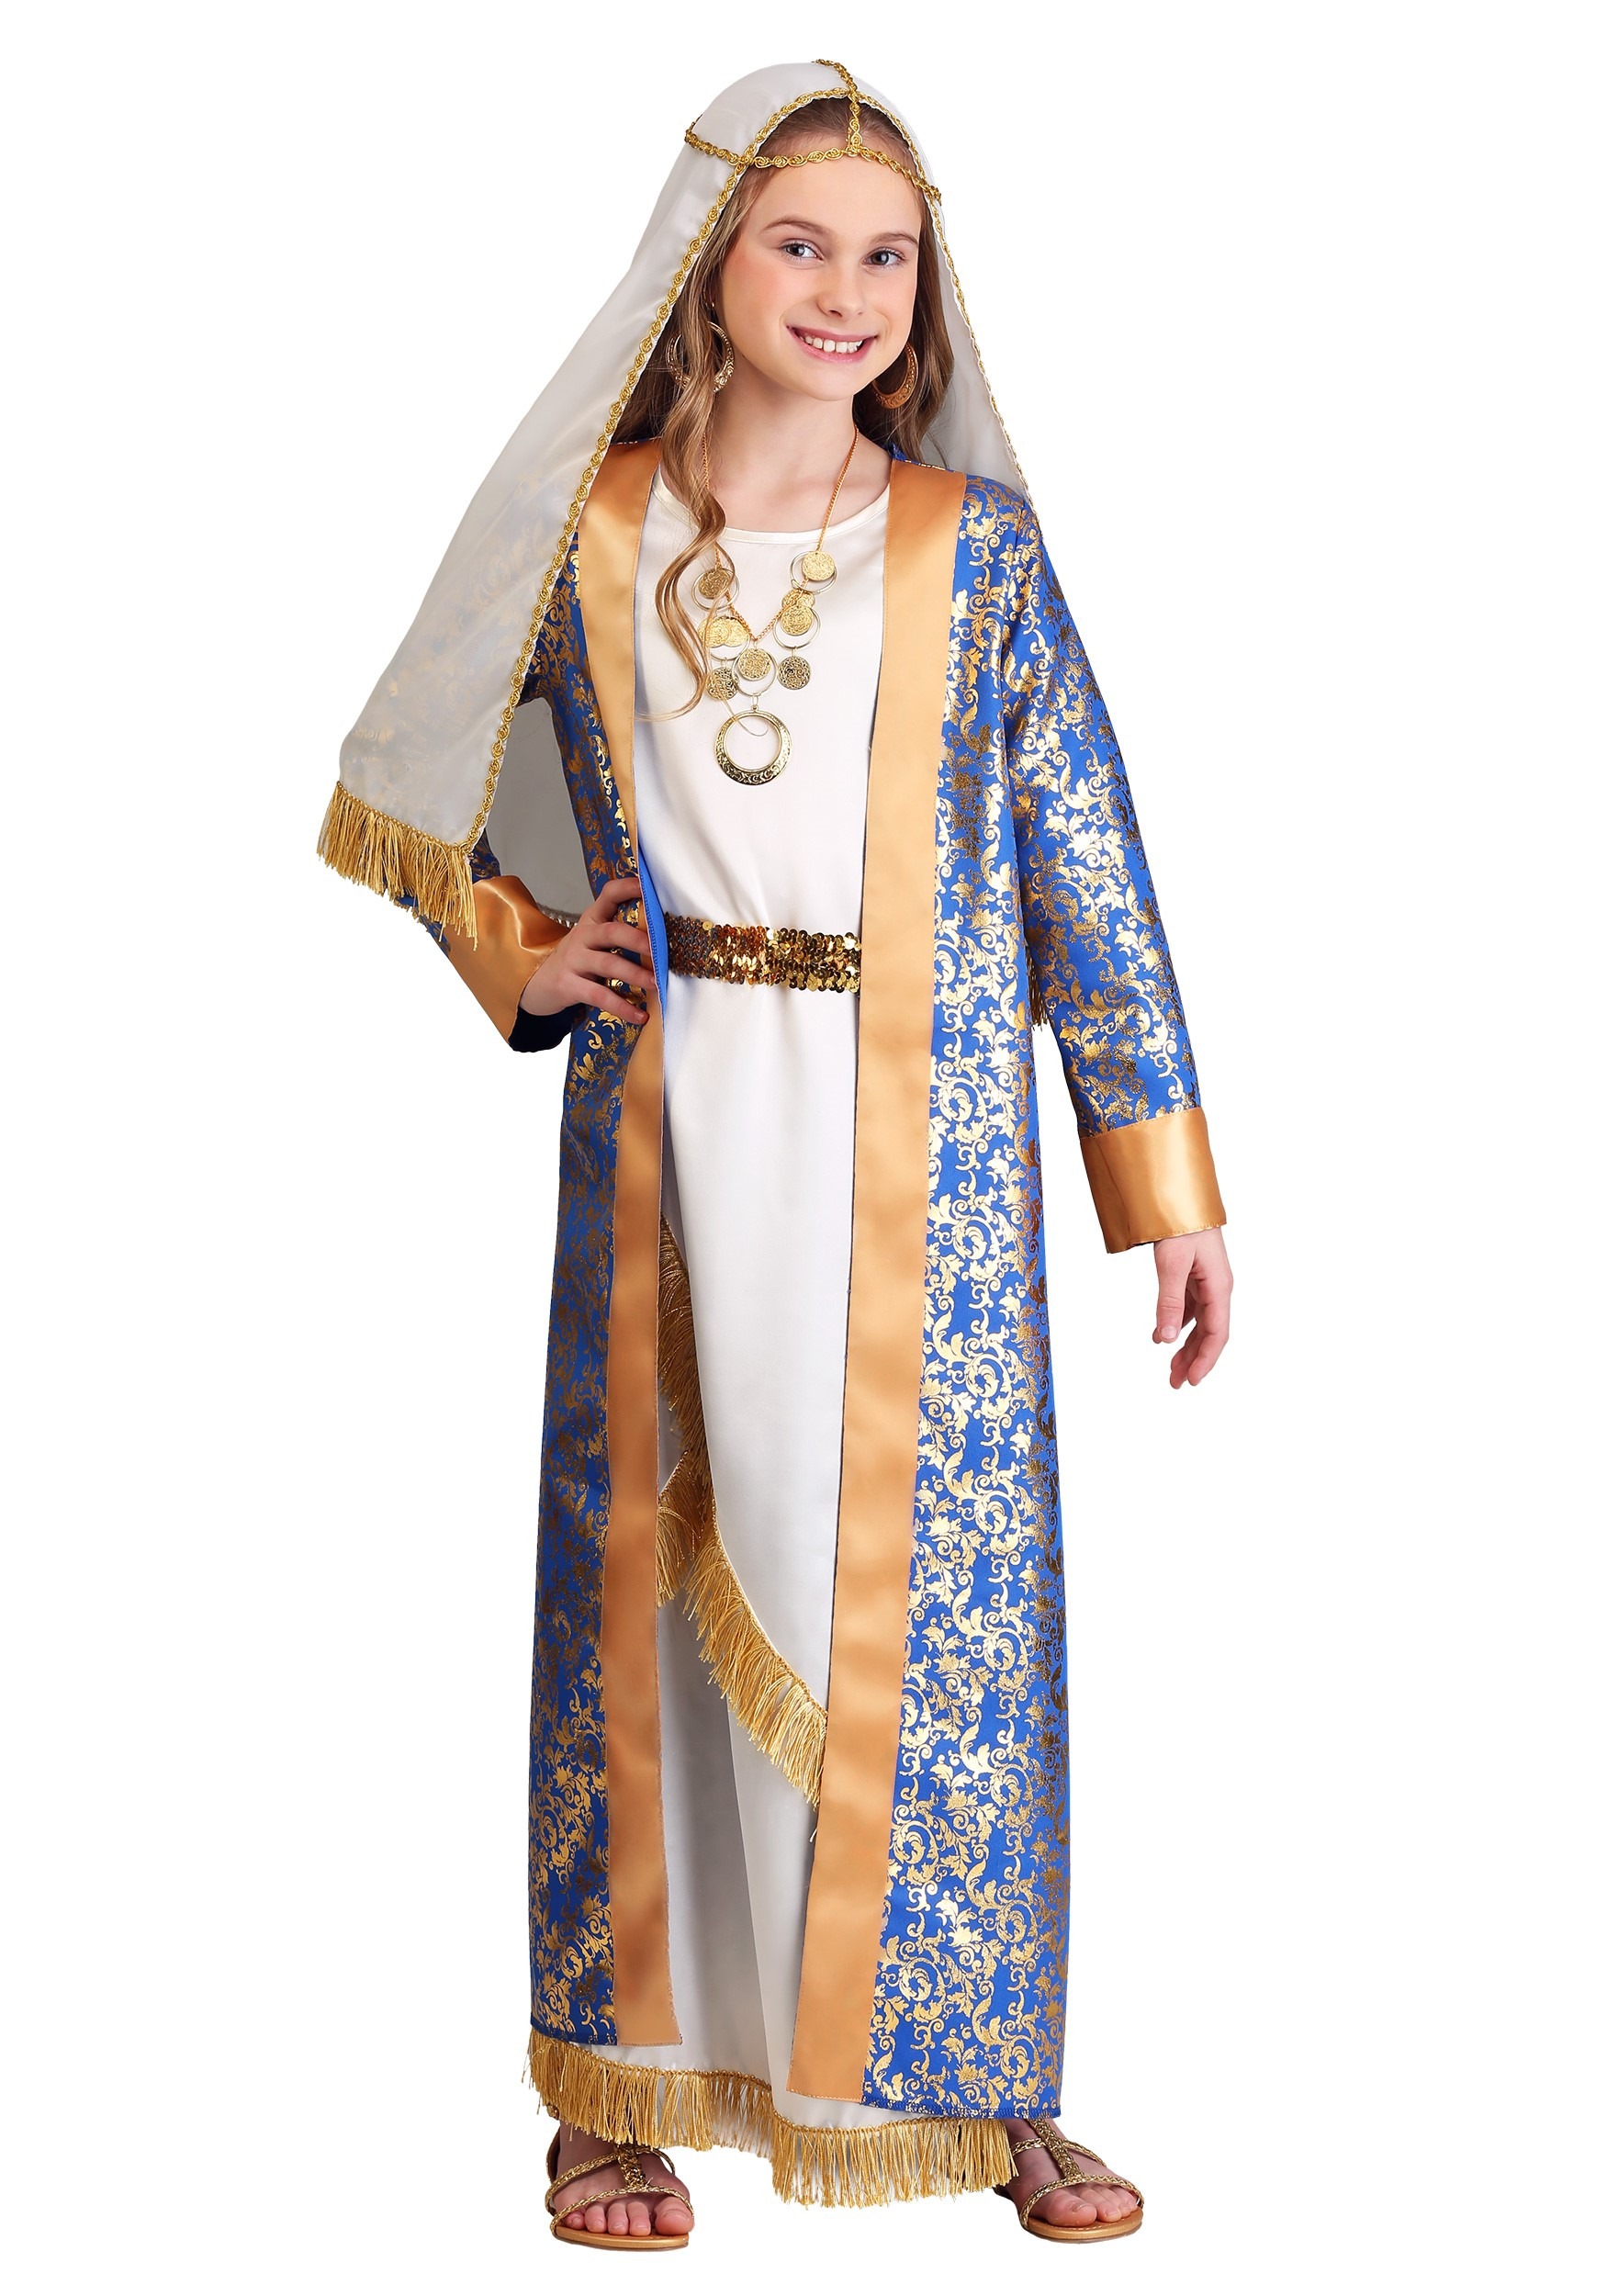 Queen Esther Costume For Girls